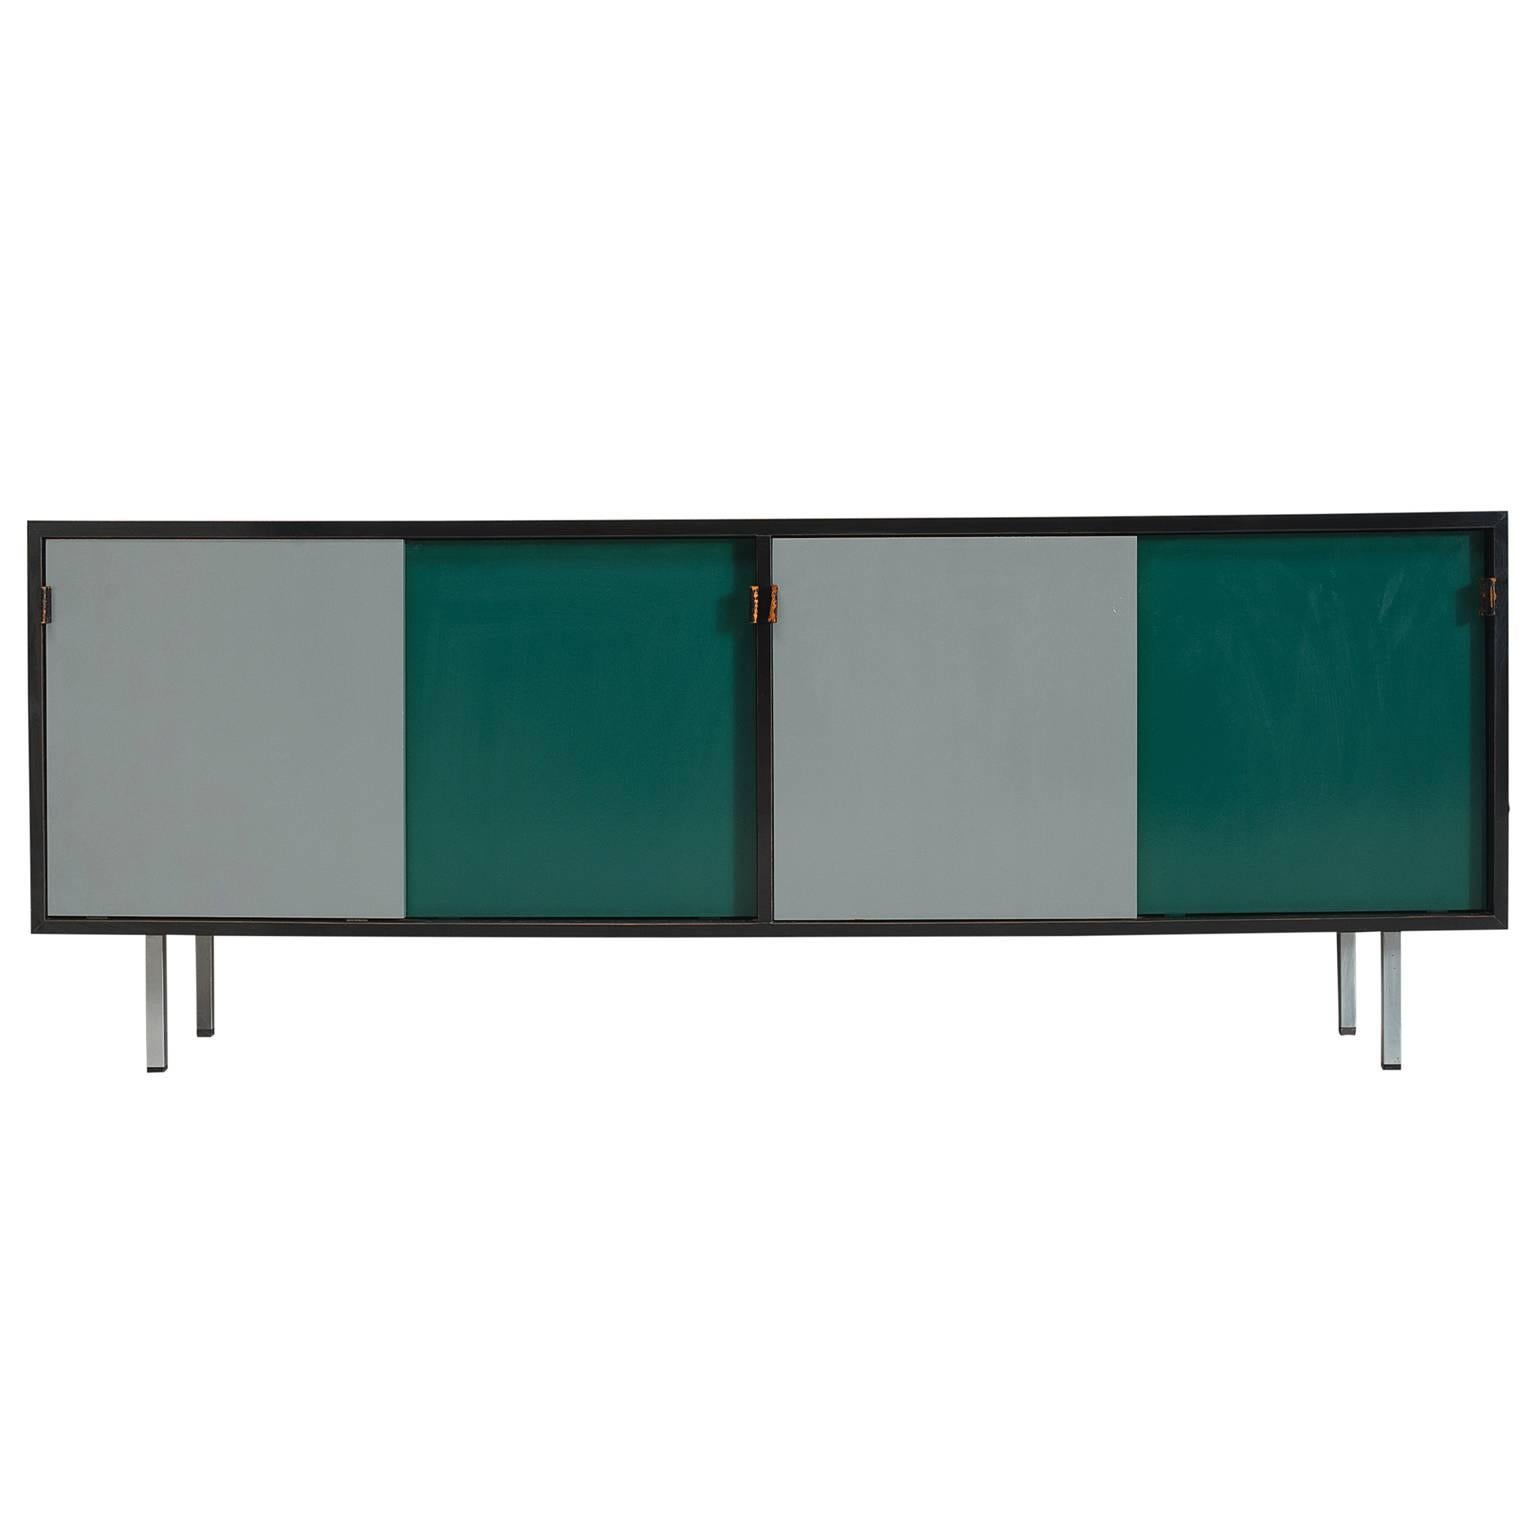 Florence Knoll Credenza in in Grey and Green with Leather Handles